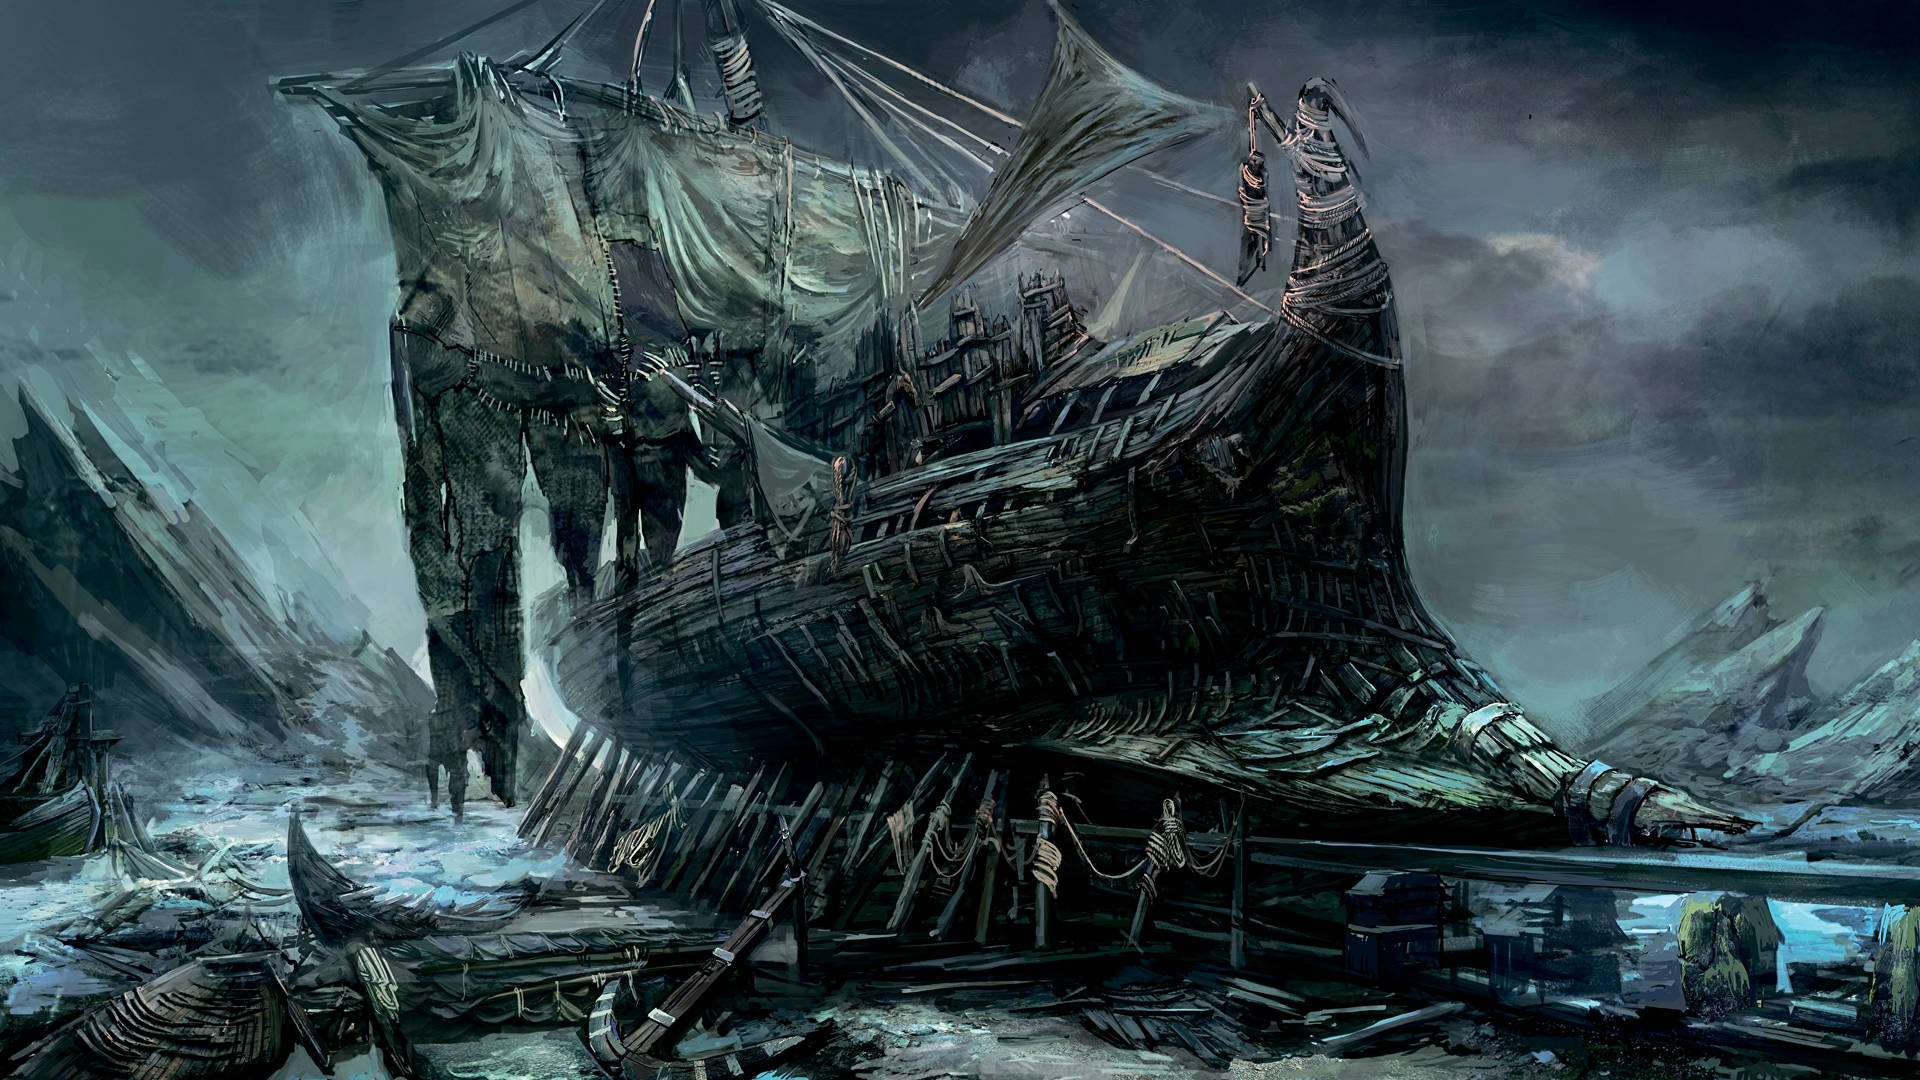 Haunted Ghost Ship Wreck Background